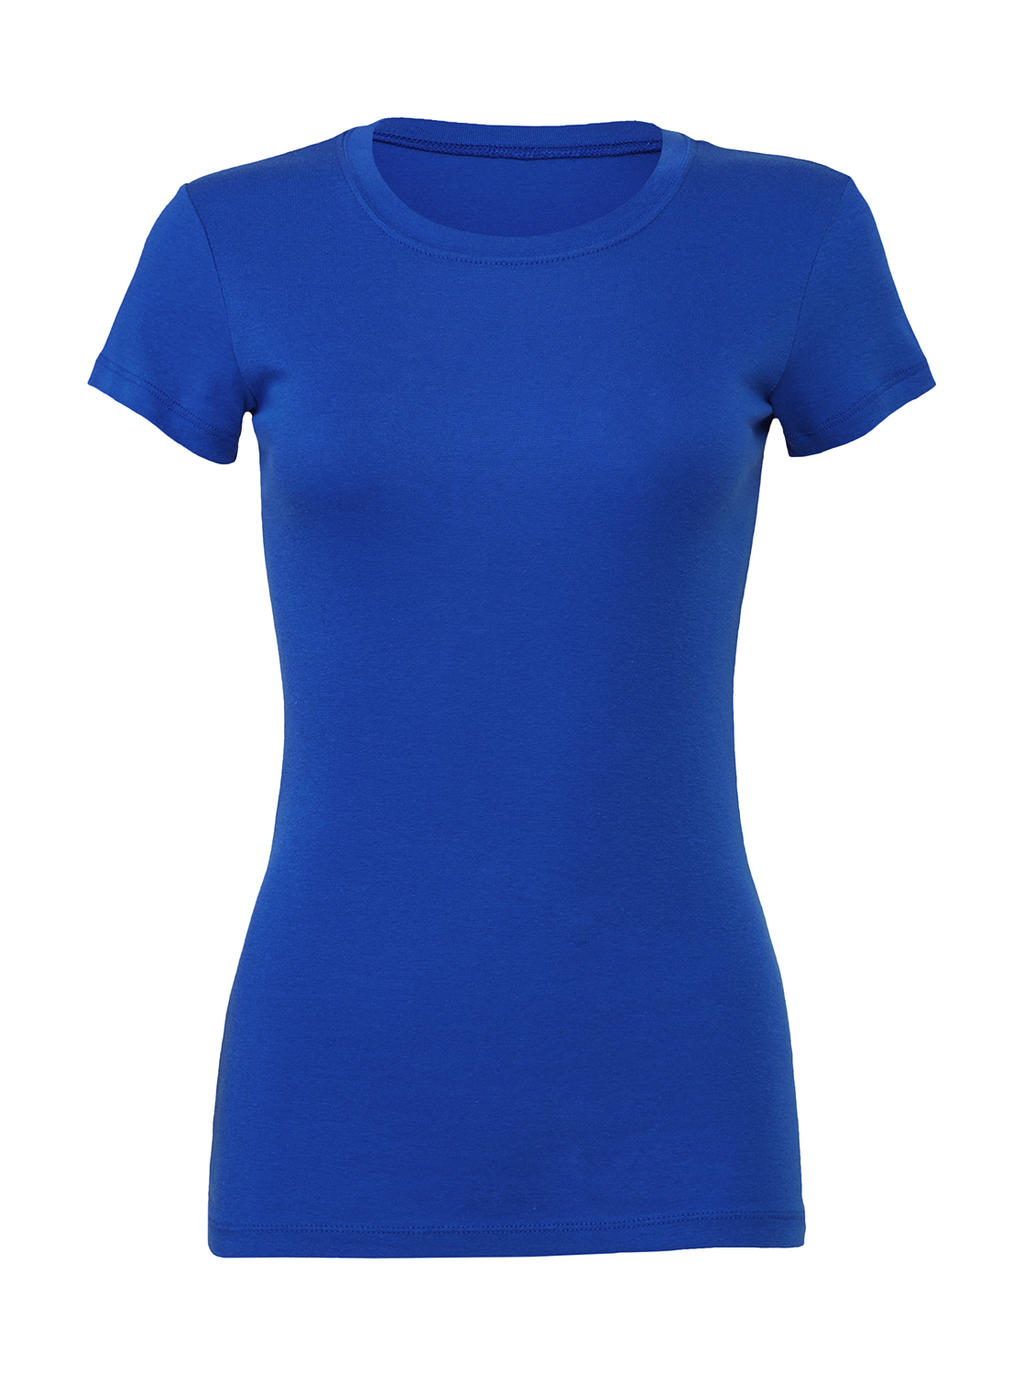  The Favorite T-Shirt in Farbe True Royal